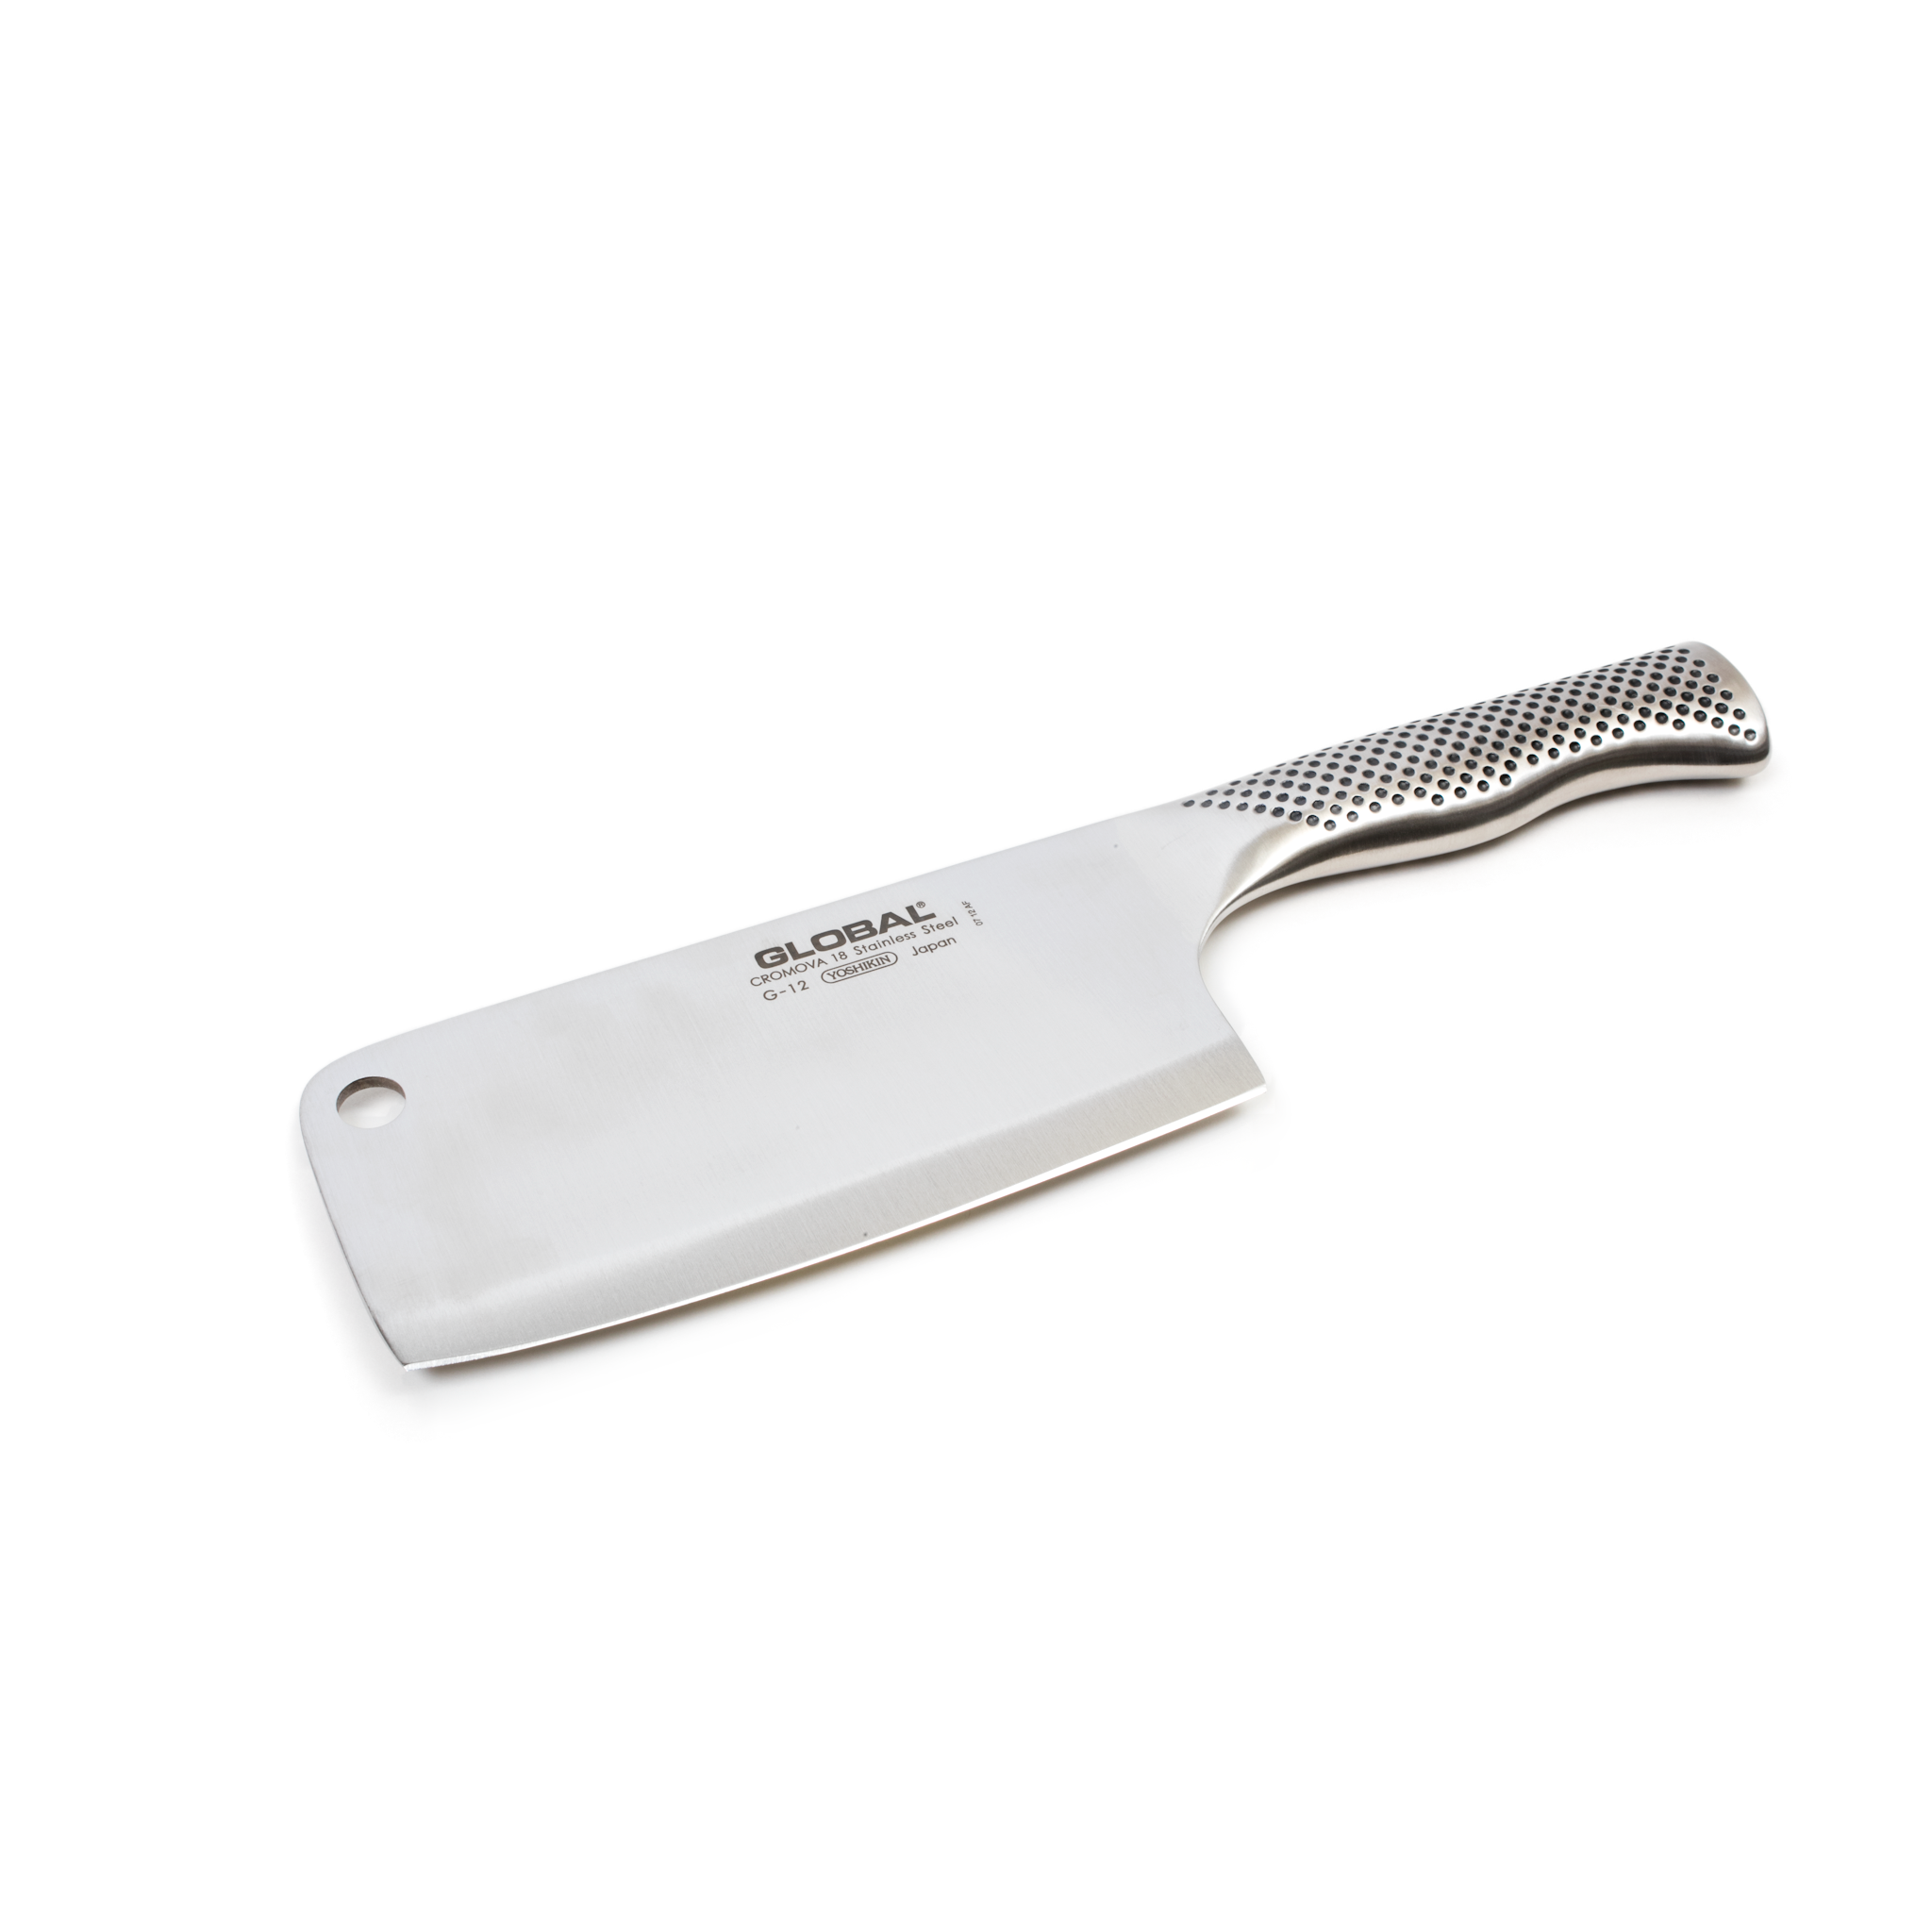 Global Classic Stainless Steel 6.25 Inch Meat Cleaver